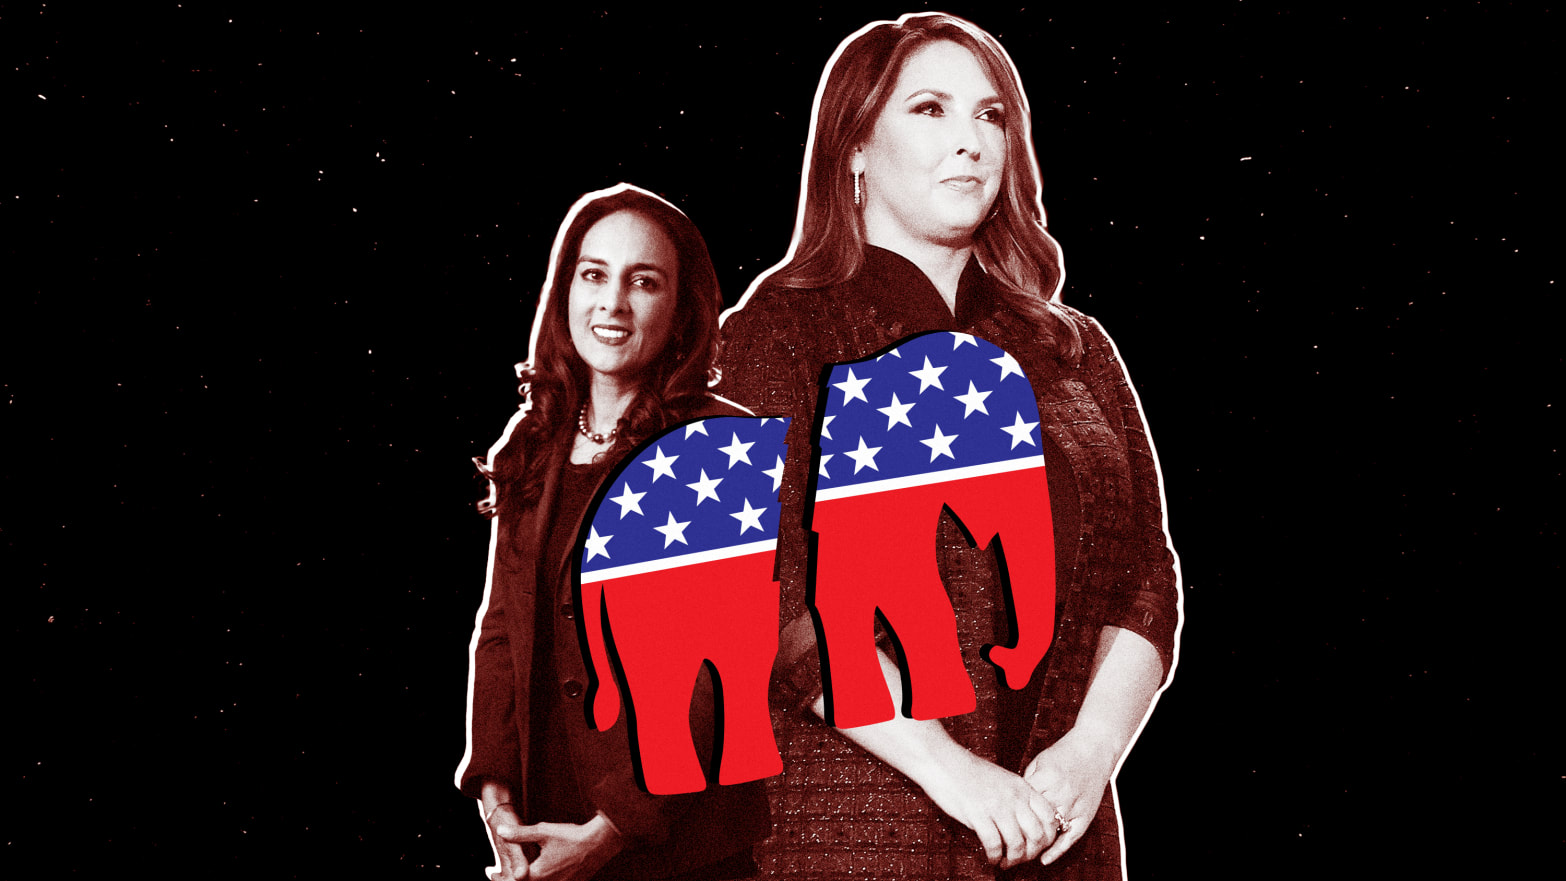 Illustration featuring Ronna McDaniel and her challenger Harmeet Dhillon